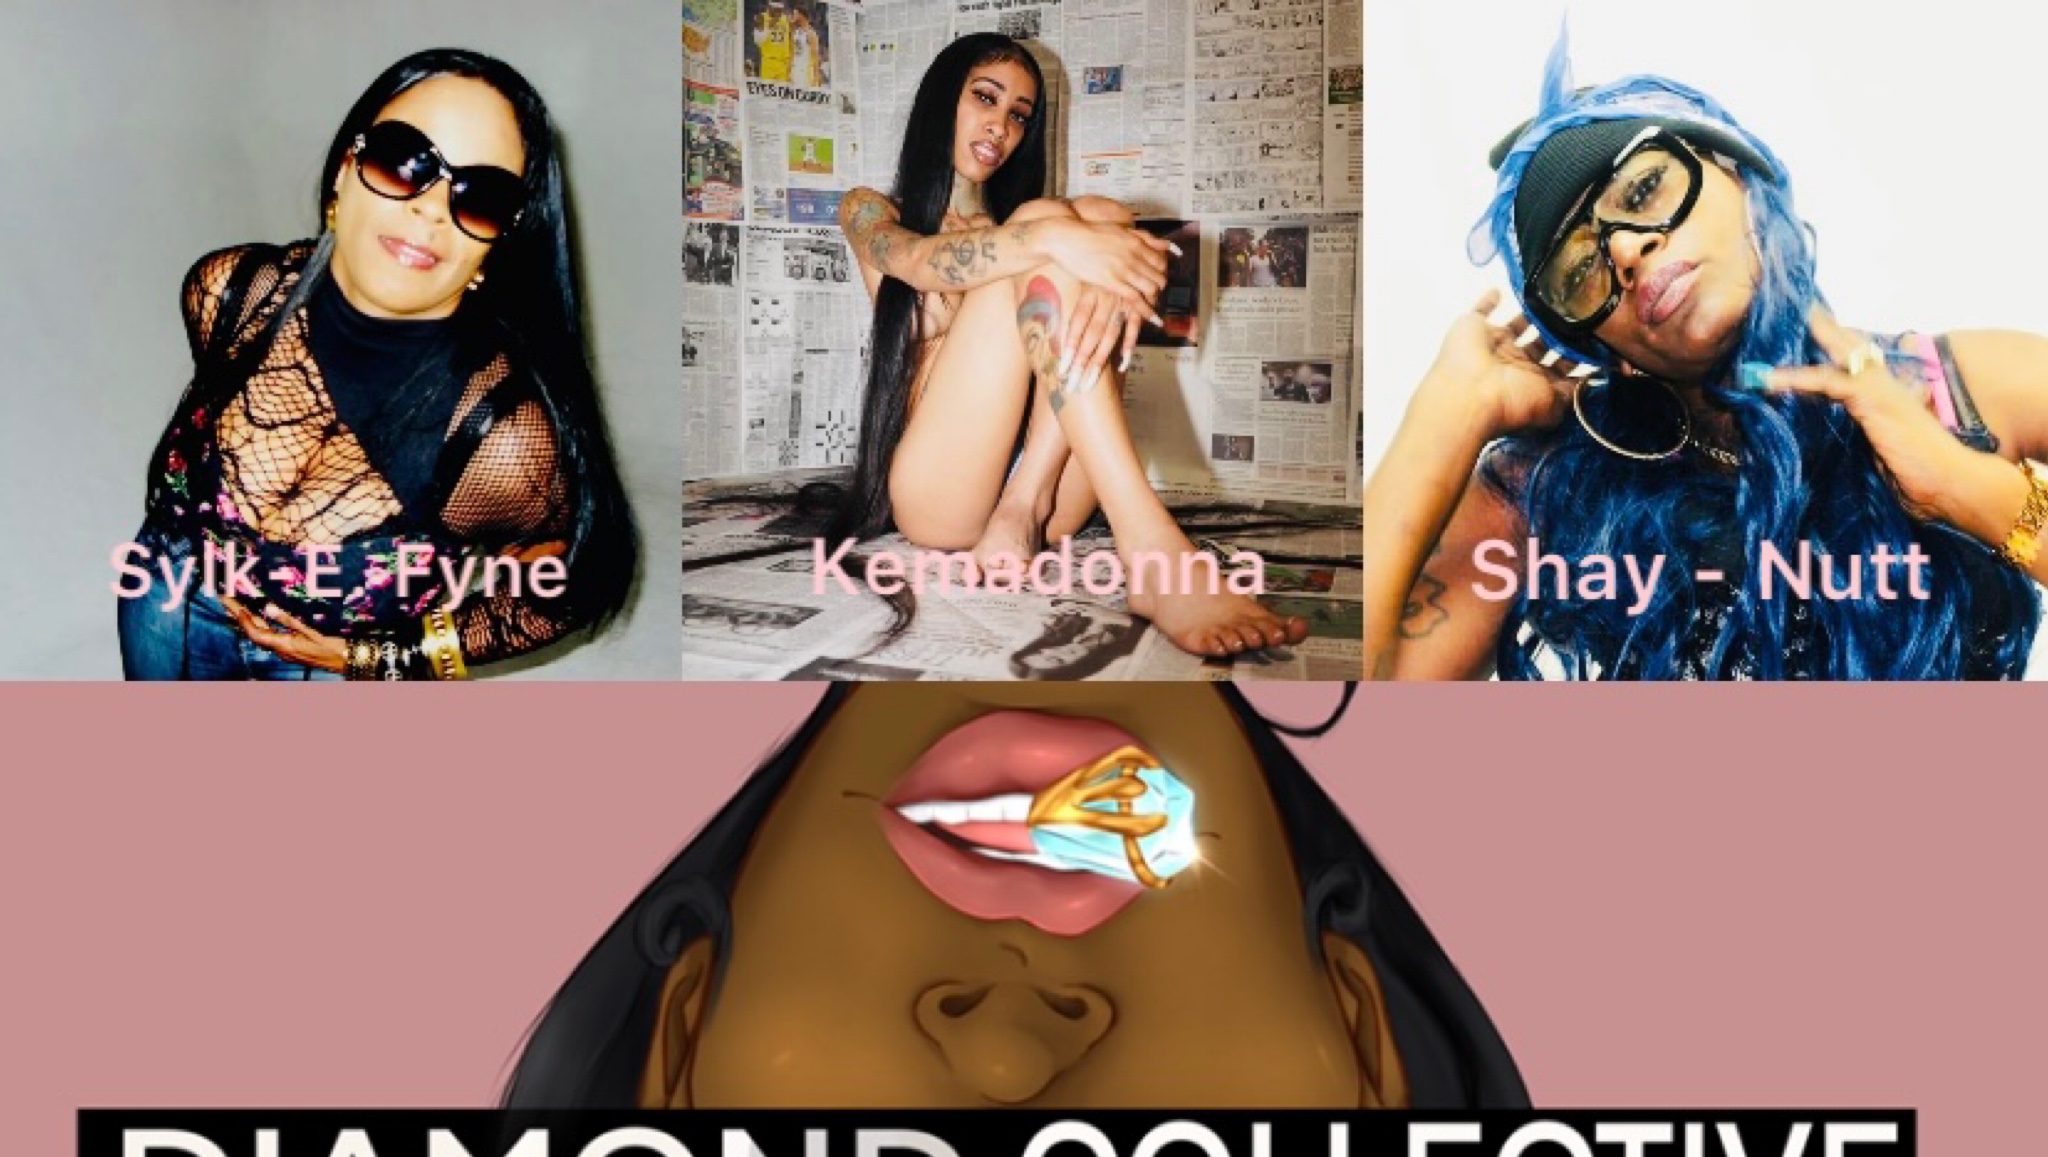 West Coast Female Rappers Bring “The Diamond Collective